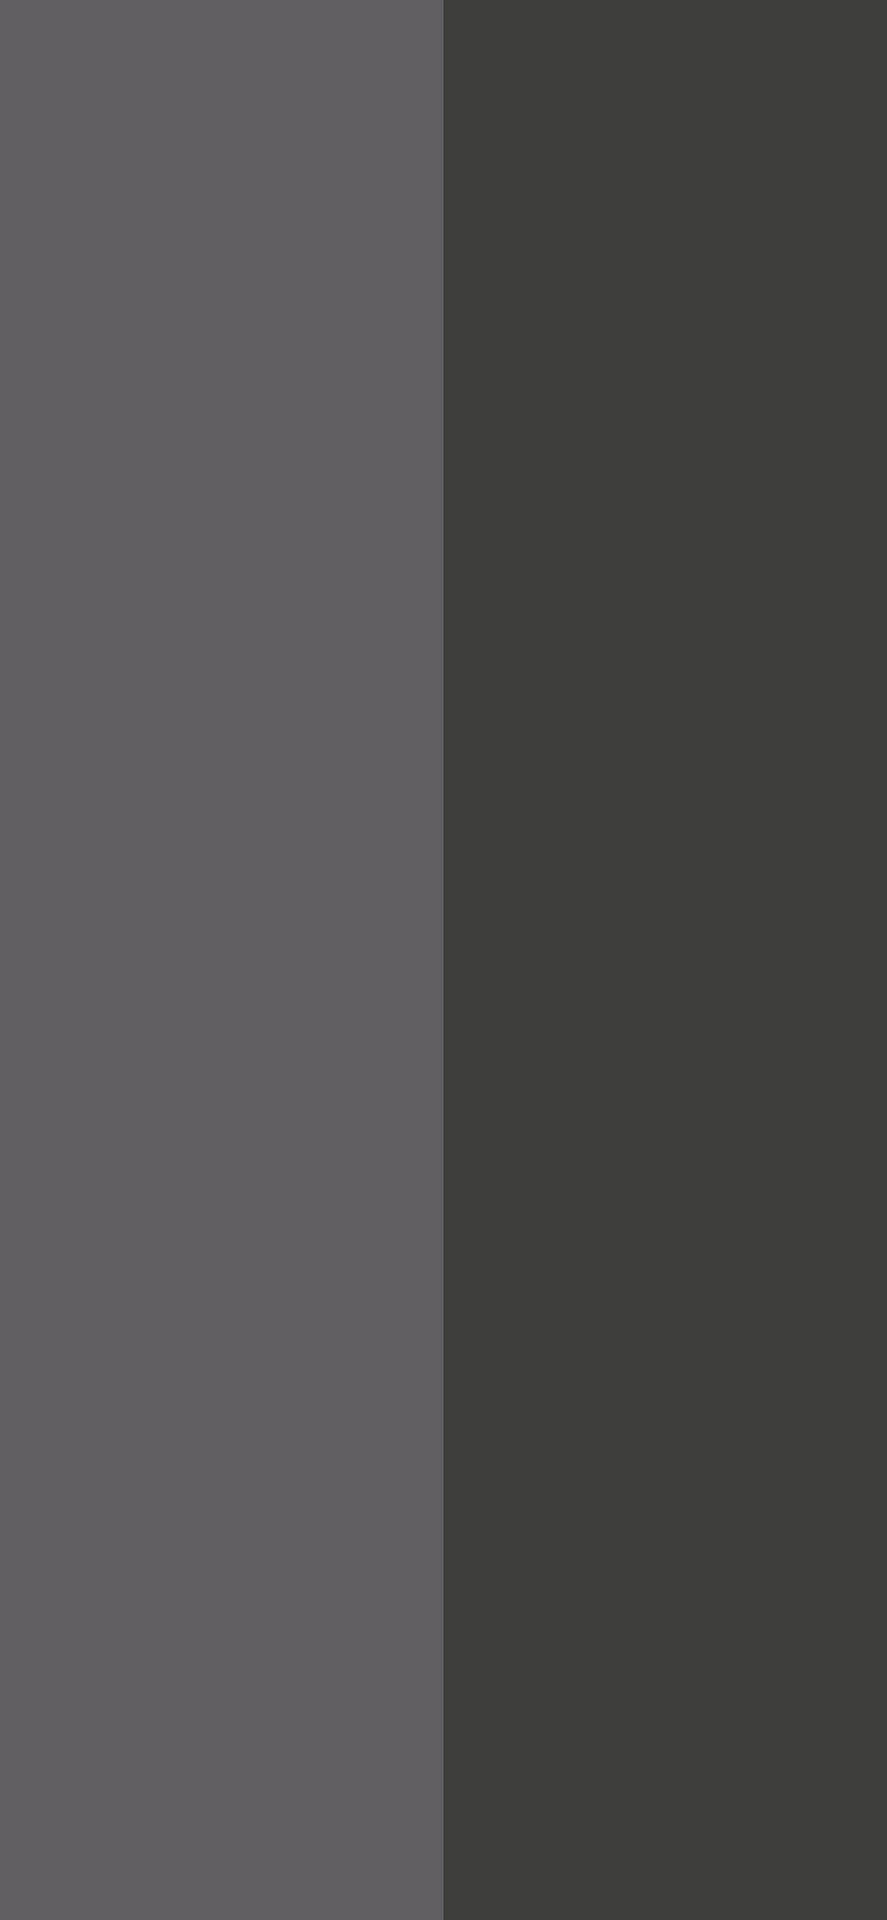 A Split Of Shades Of Gray Background